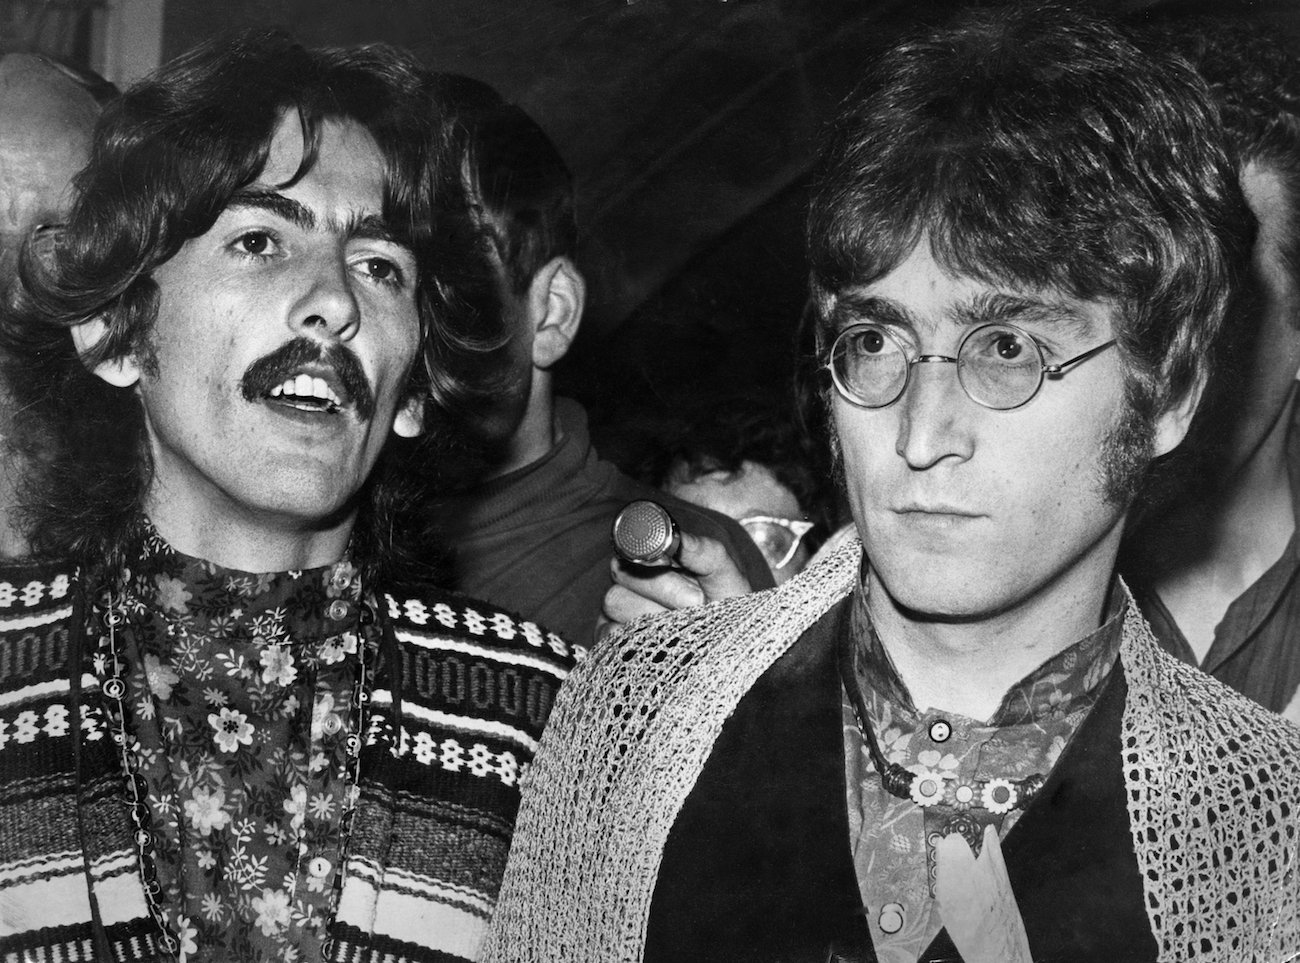 George Harrison and John Lennon following the death of their manager, Brian Epstein.